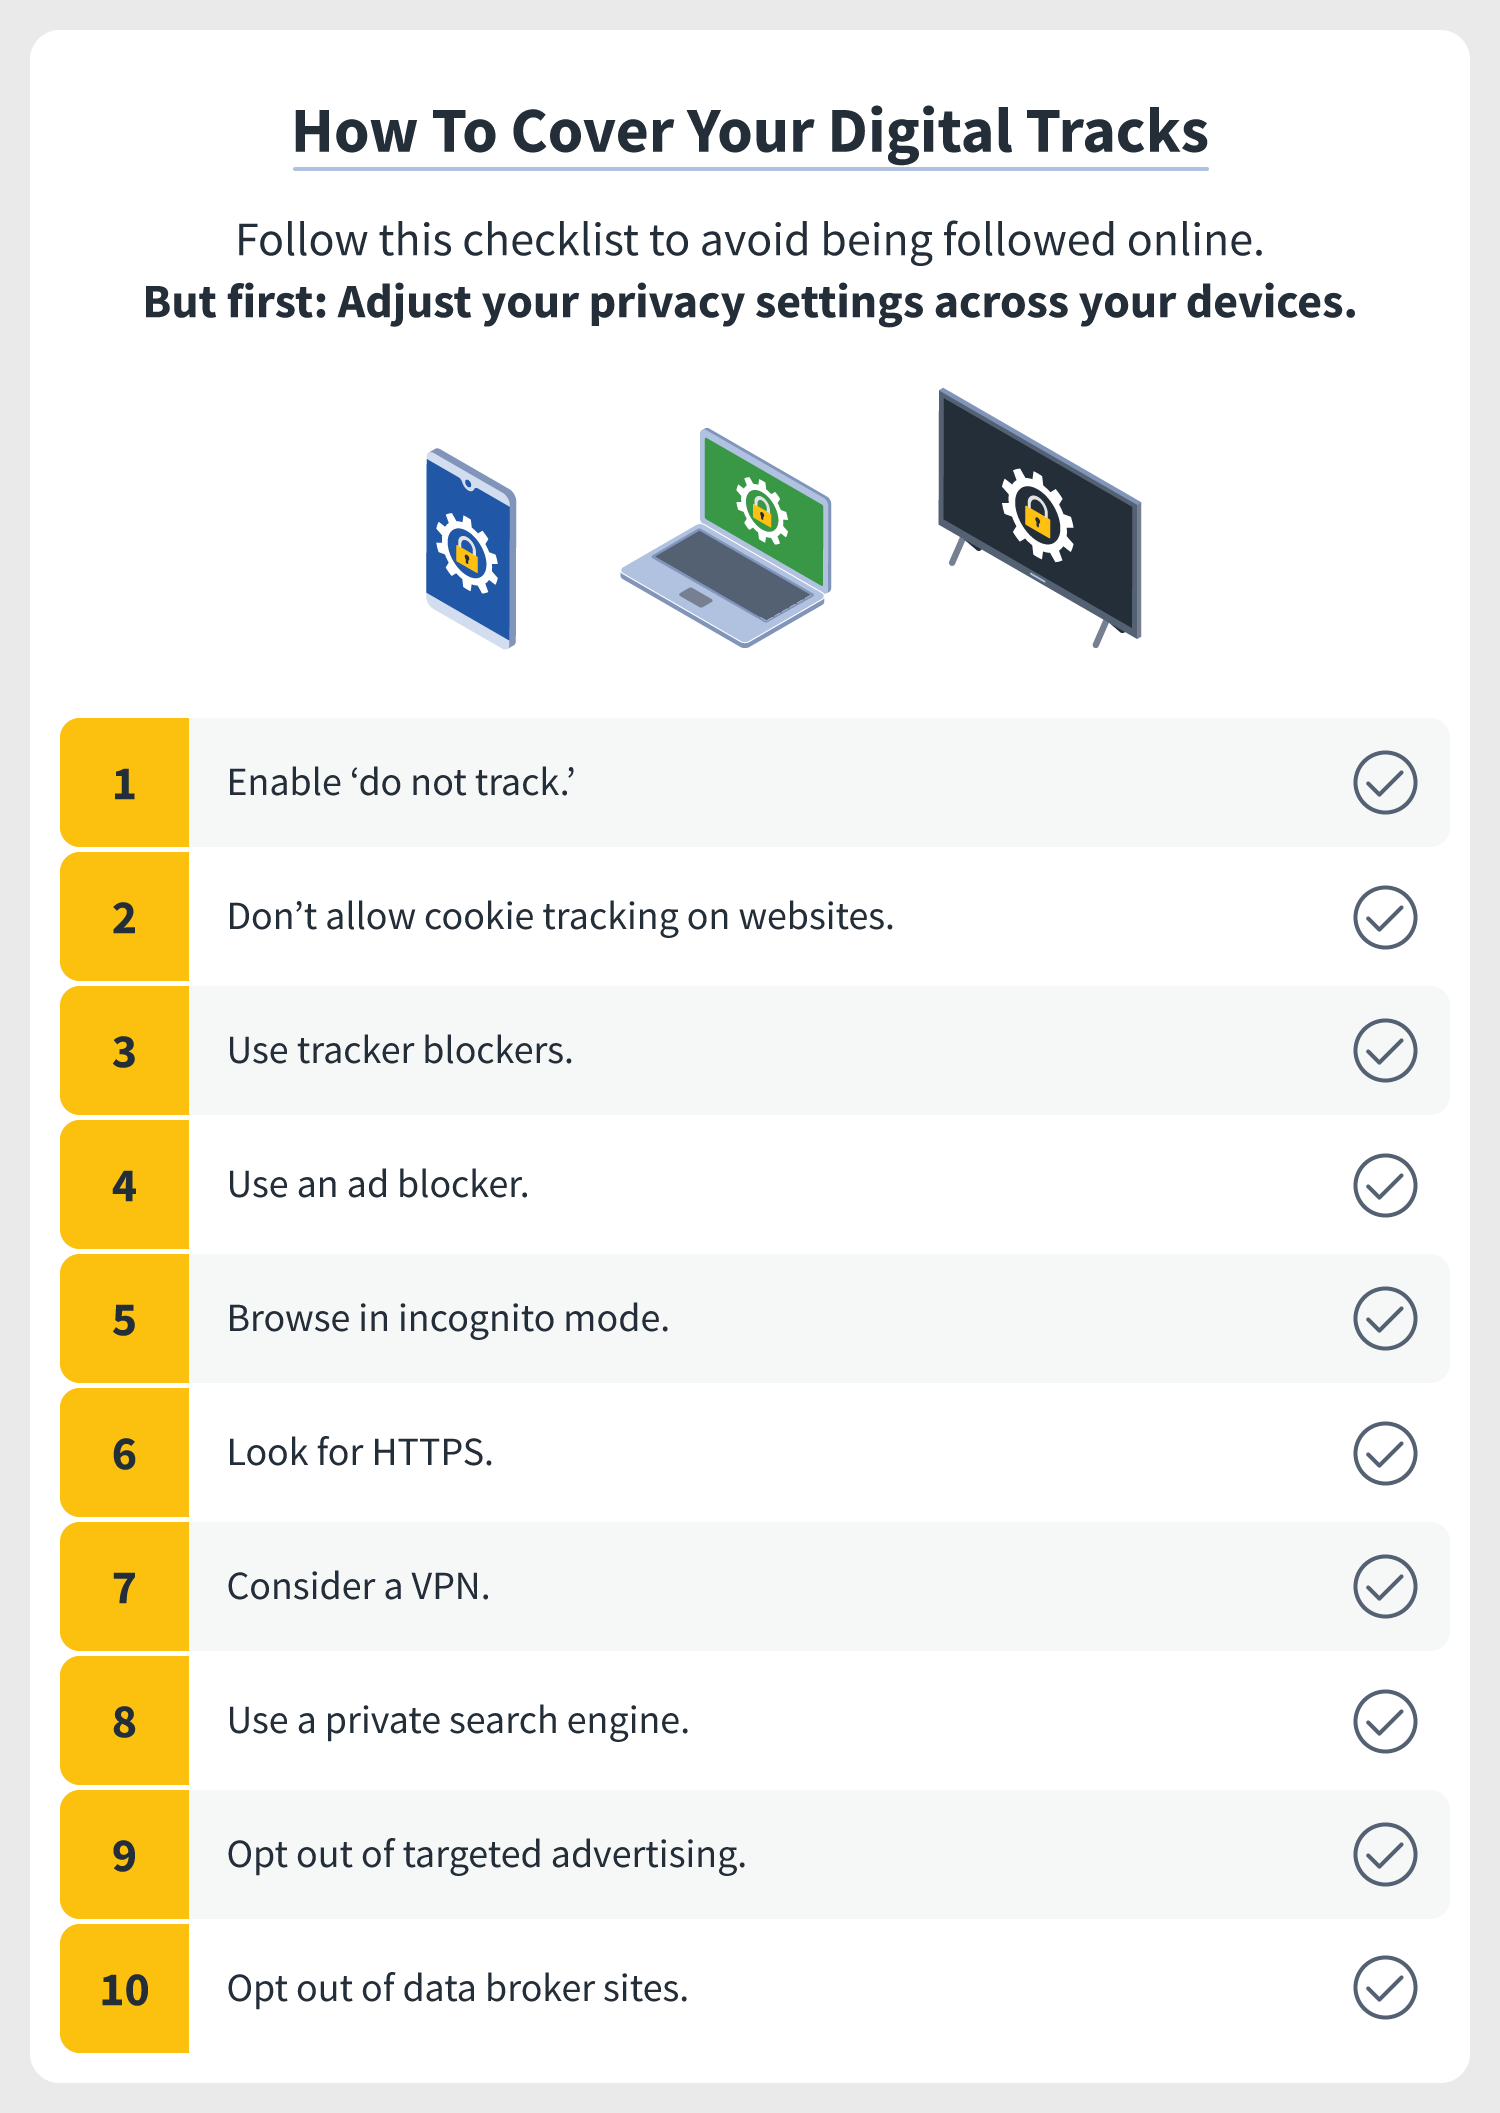 a checklist includes 10 tips for how to not be tracked online, including adjusting your privacy settings to stop internet tracking across your devices